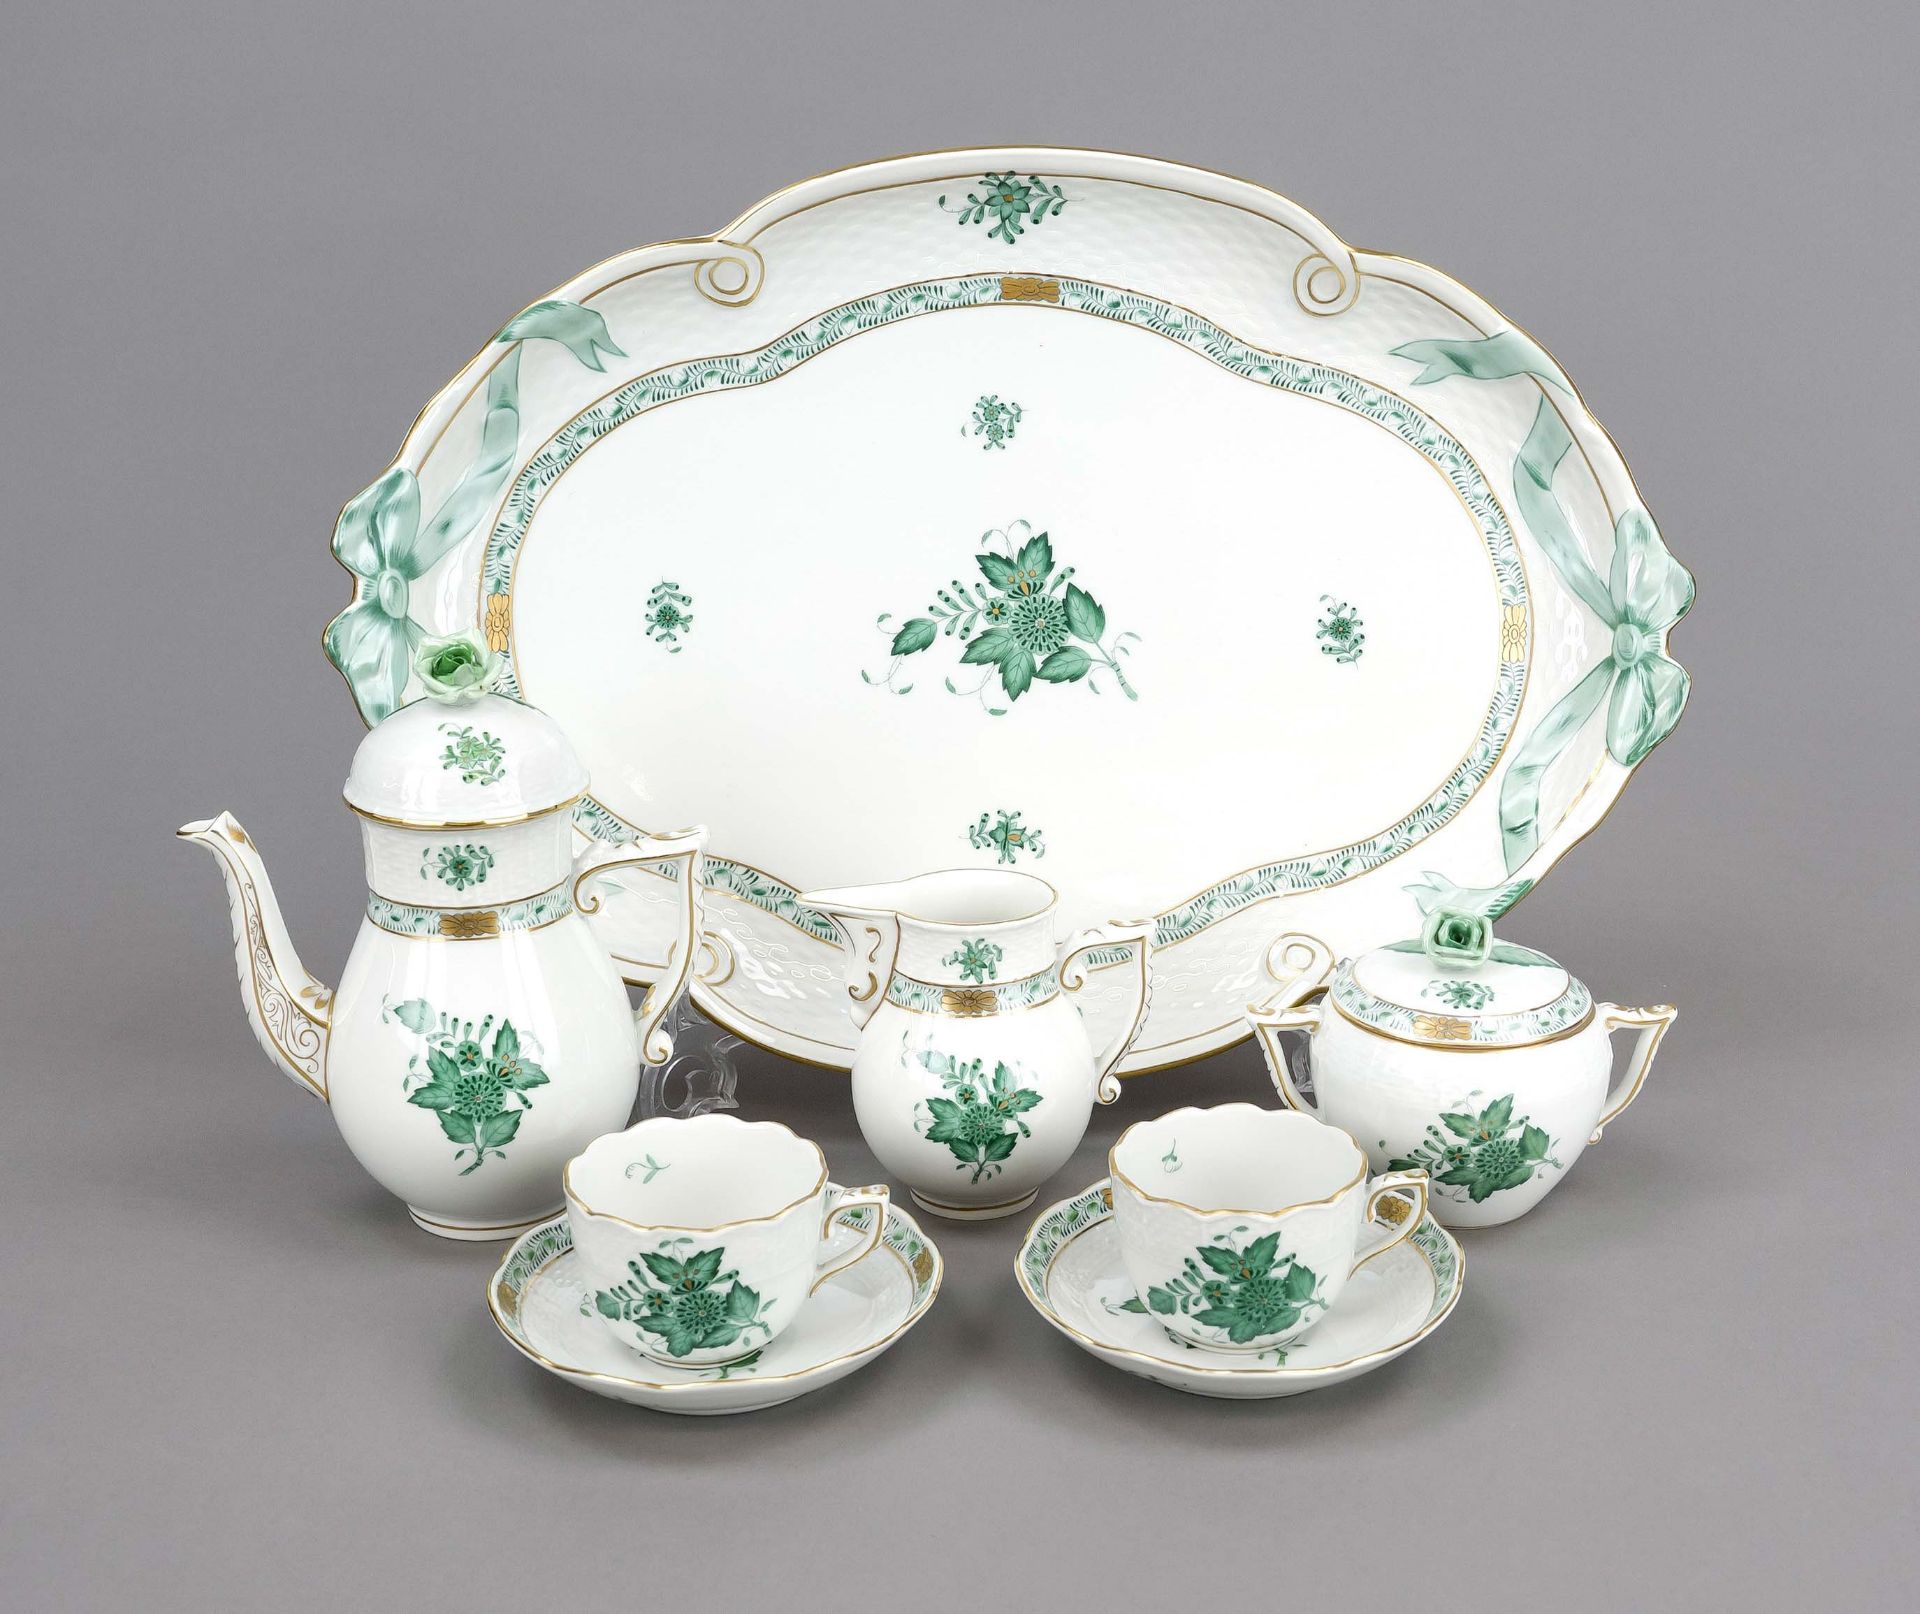 Tete-à-Tete, 6-piece, Herend, 20th century, Ozier form, Apponyi decoration in green, ornamentally